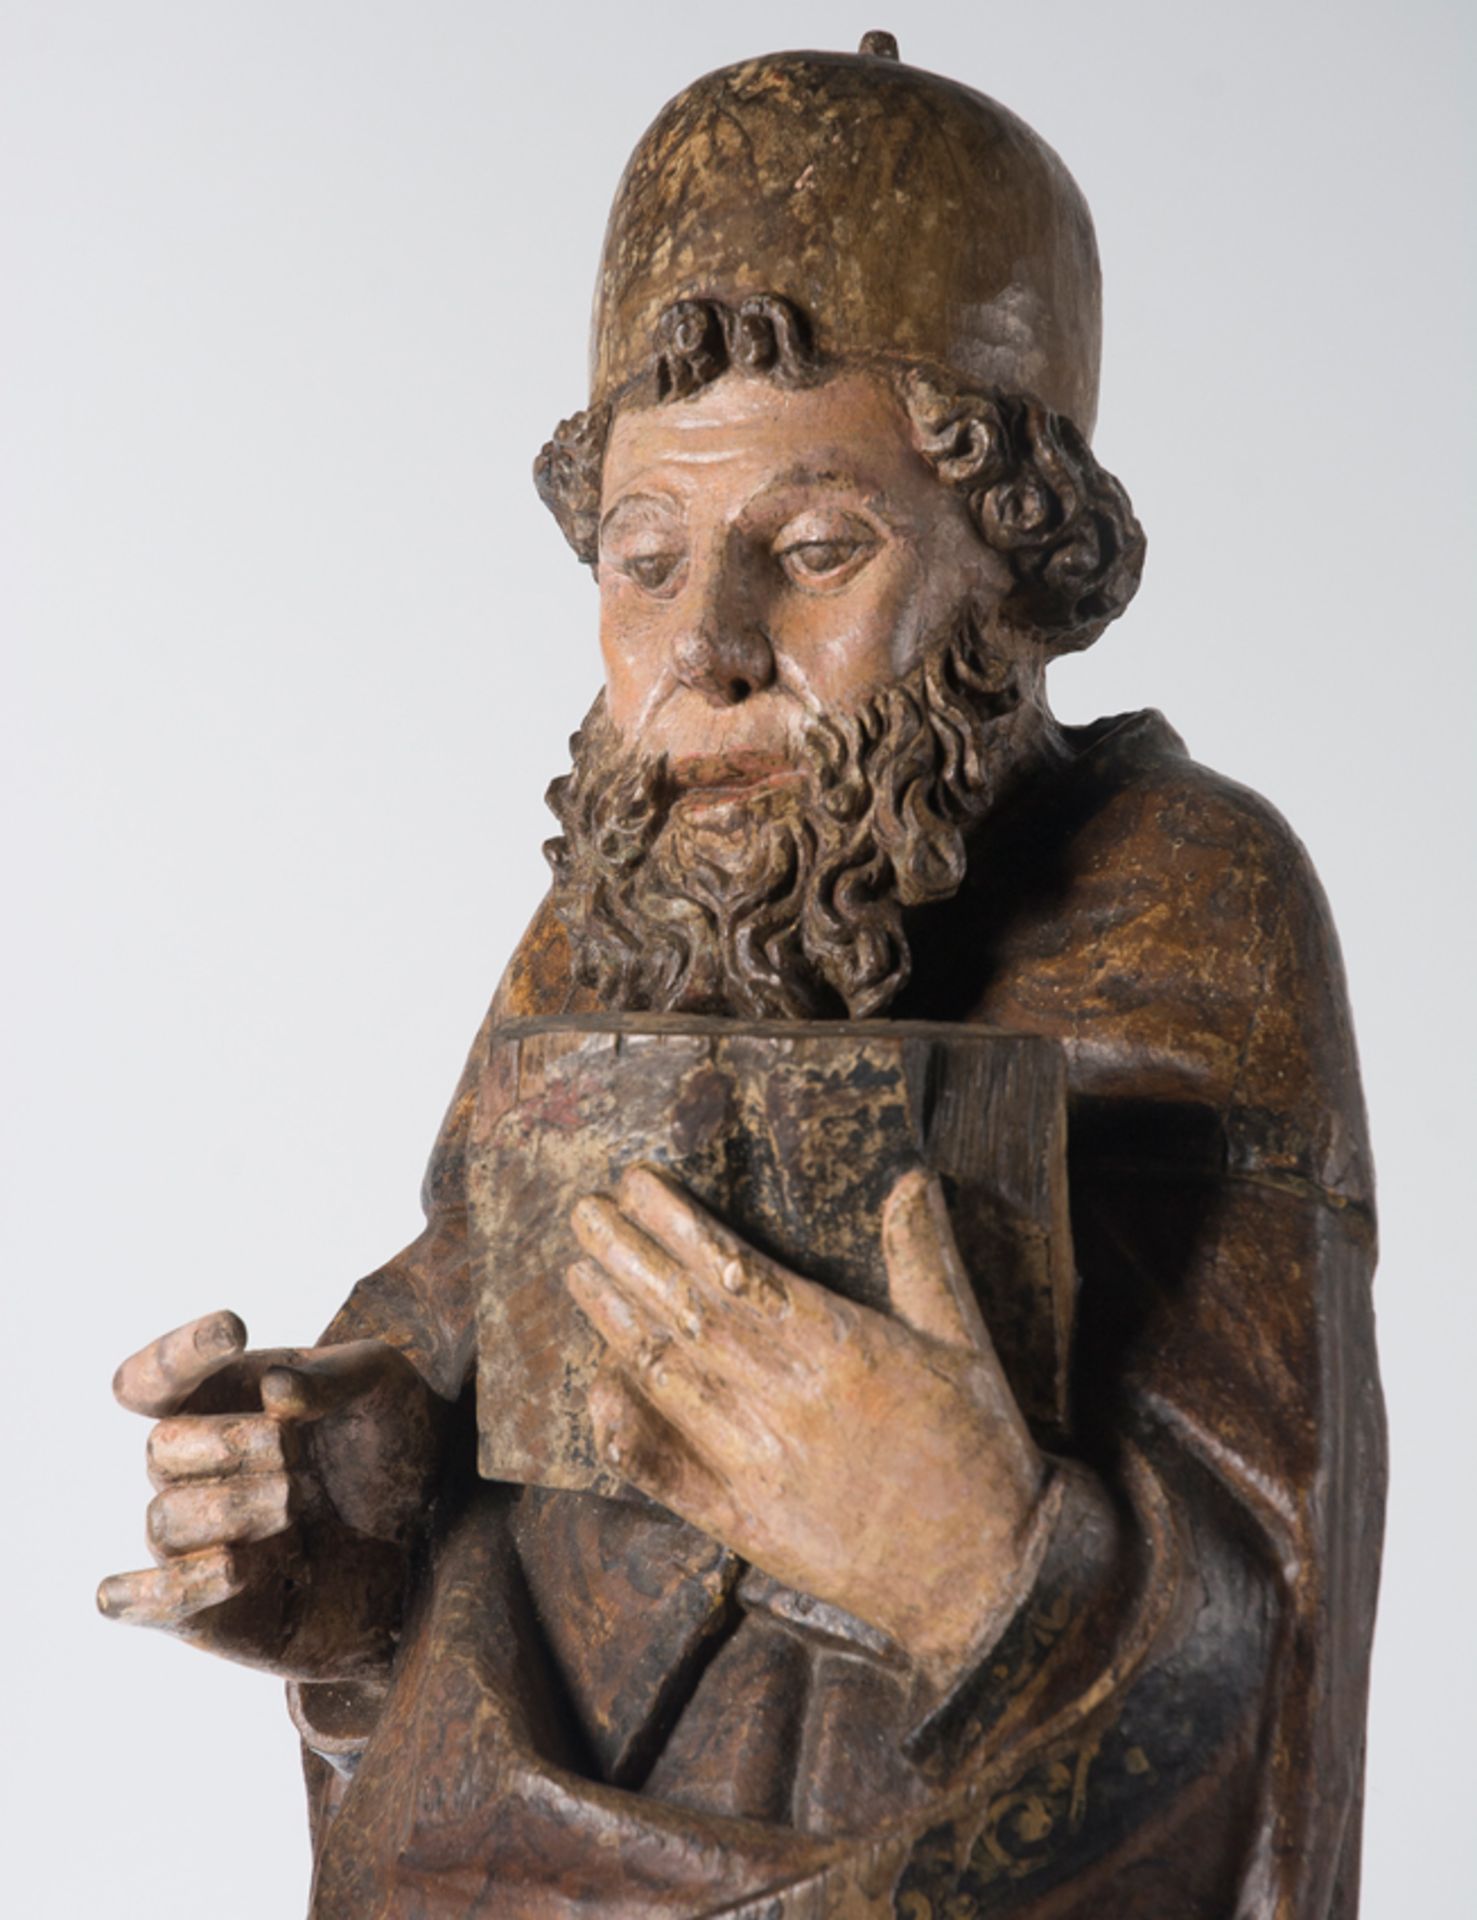 "Saint Anthony". Carved wooden sculpture. Castilian School. 15th century. - Image 5 of 10